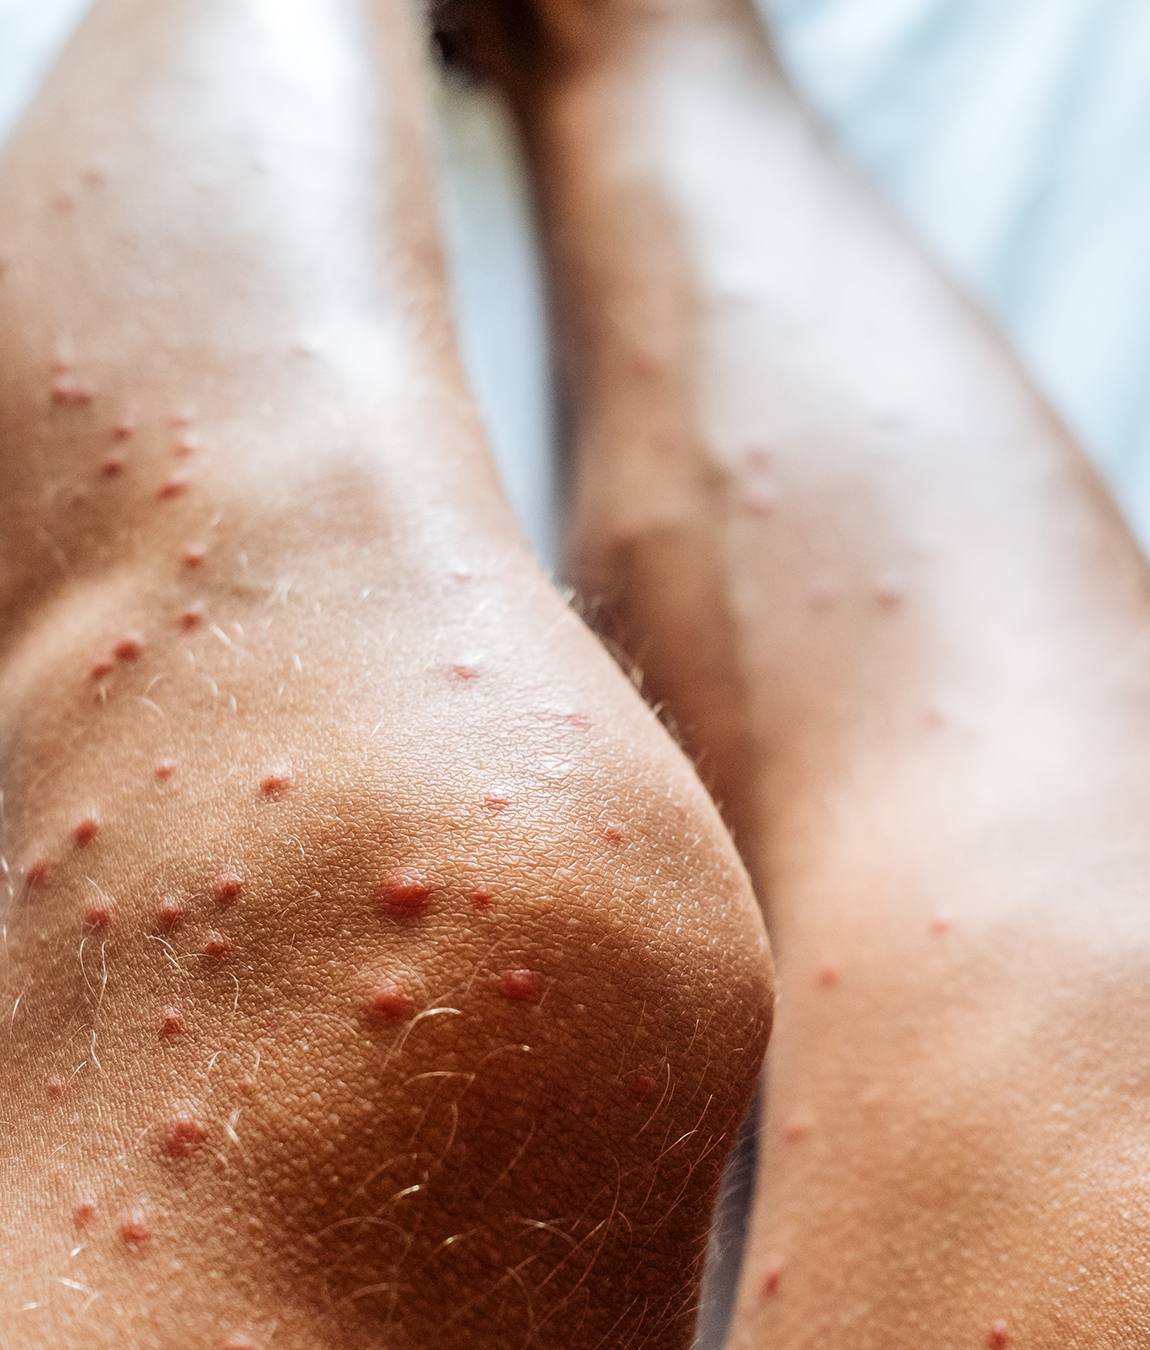 bug bites on a person's legs